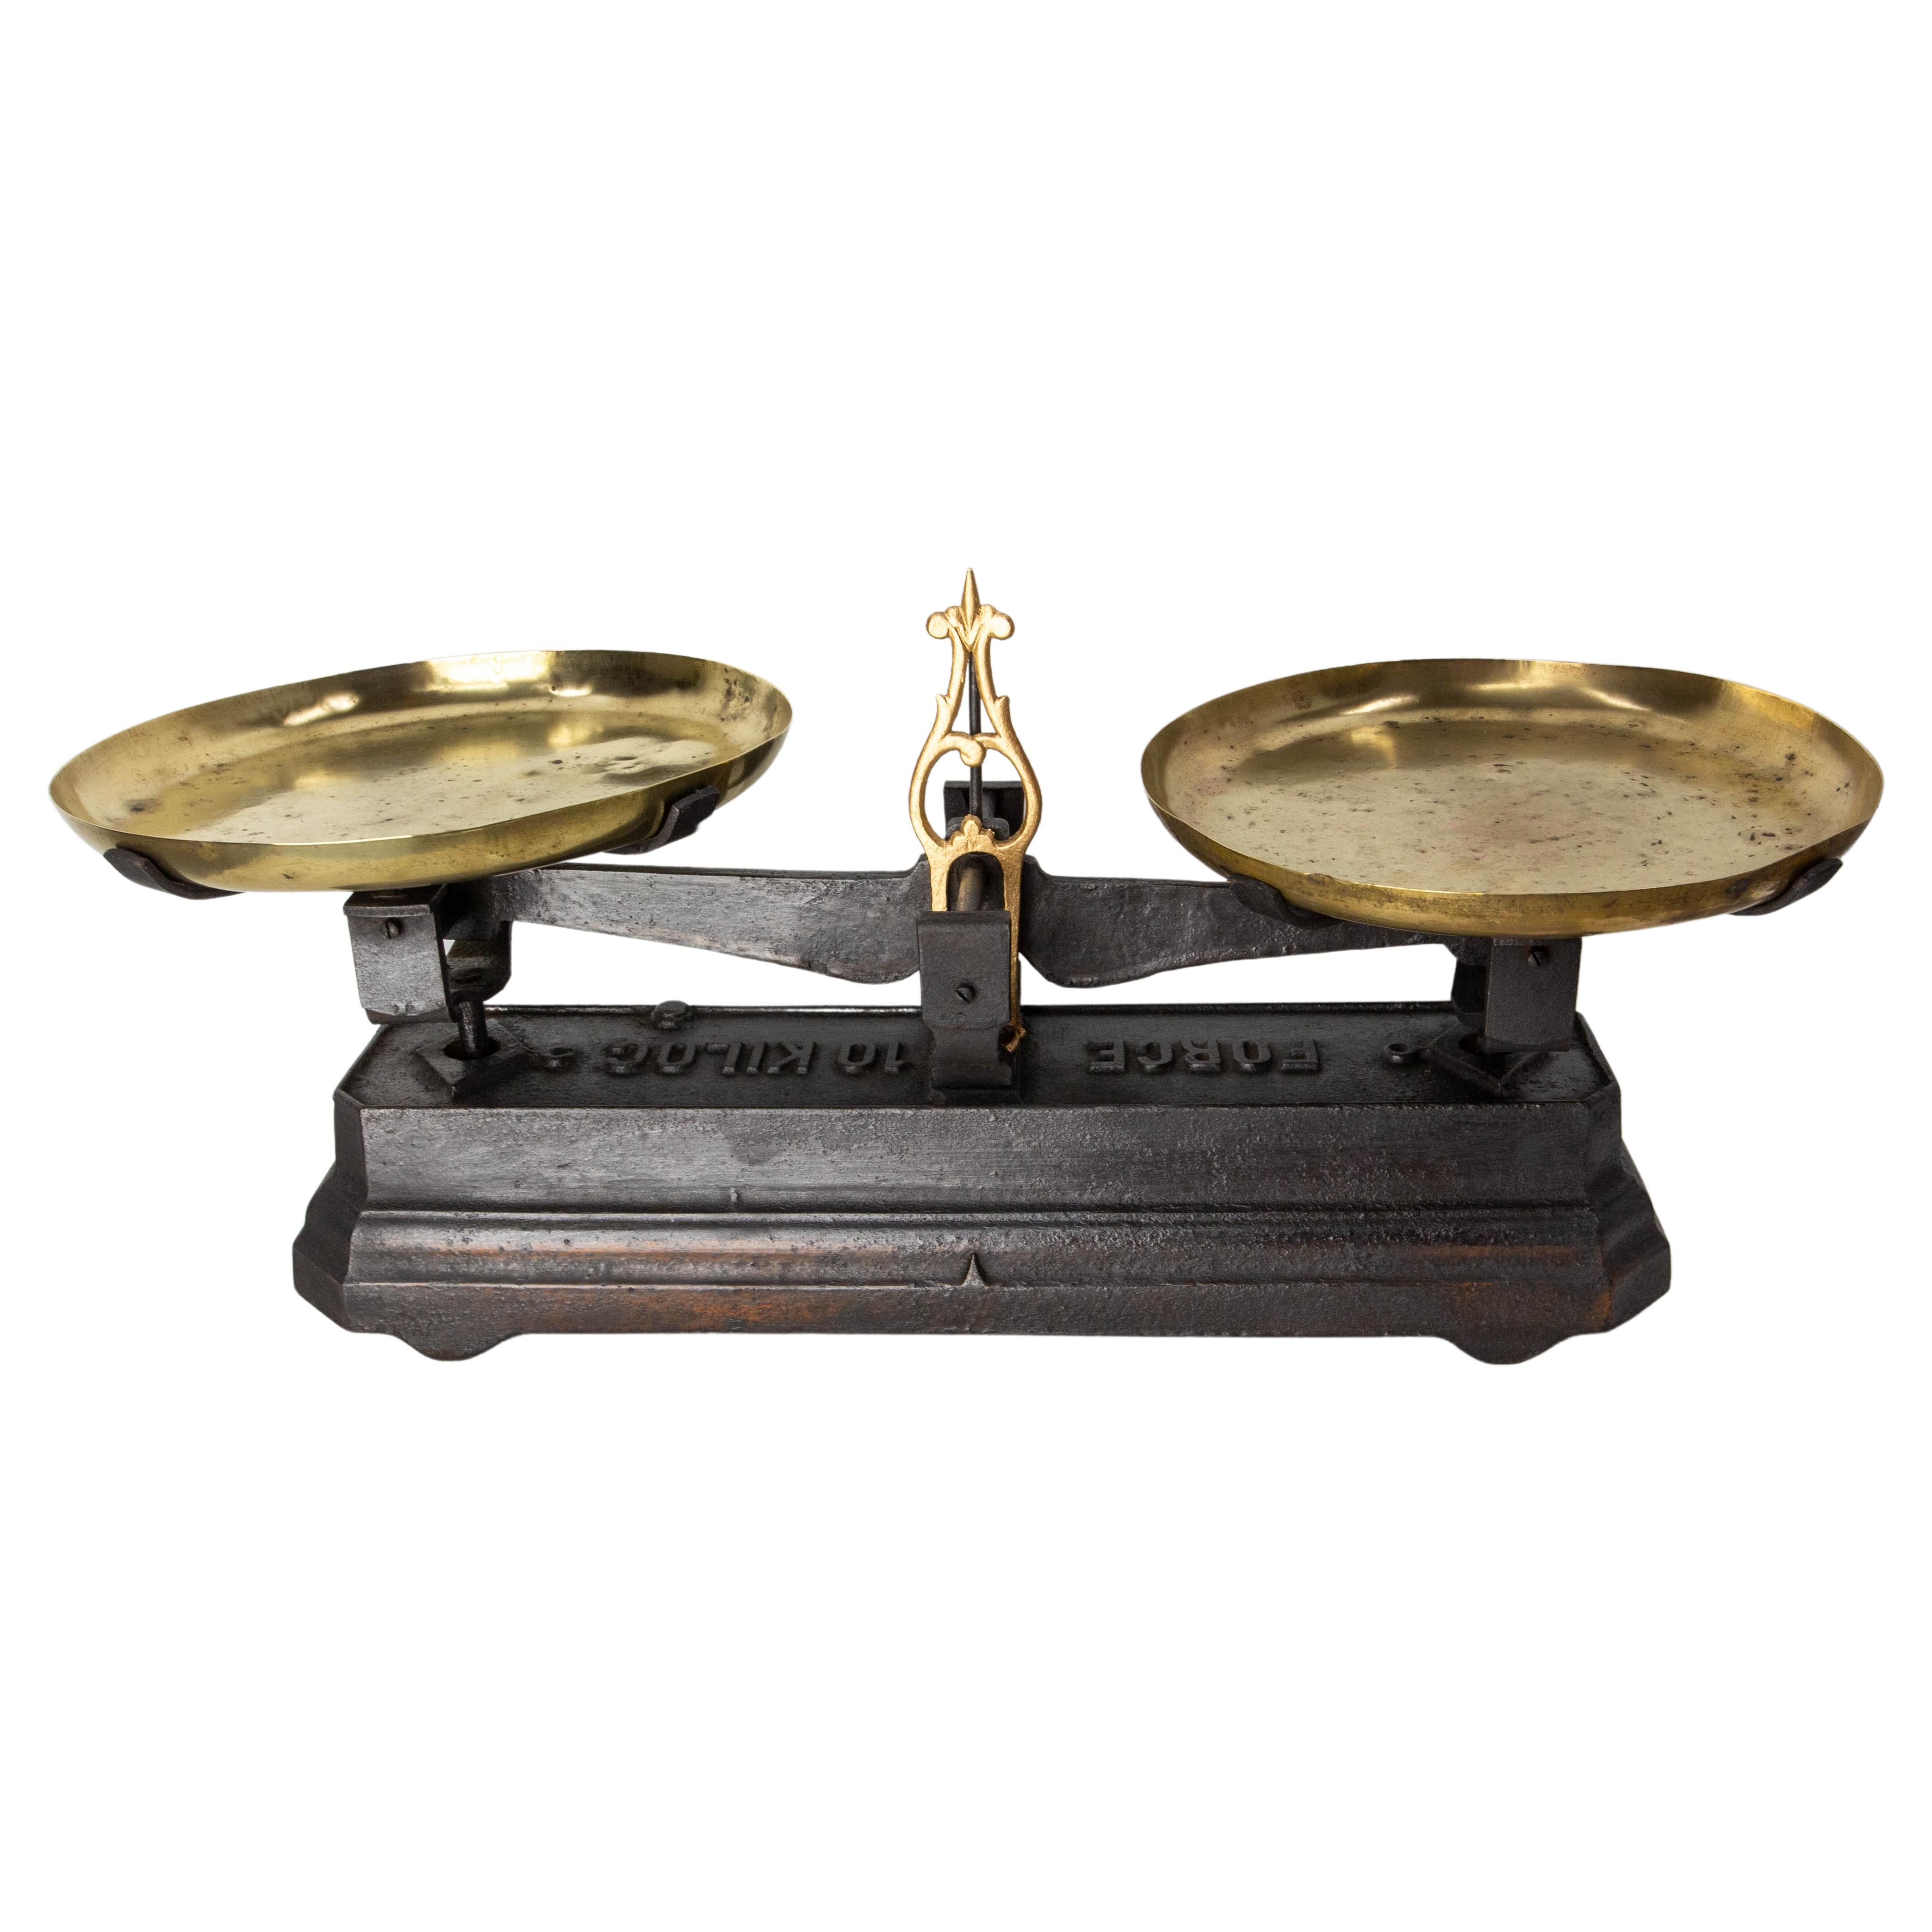 Antique Trade Scale Brass and Cast Iron, France, circa 1880